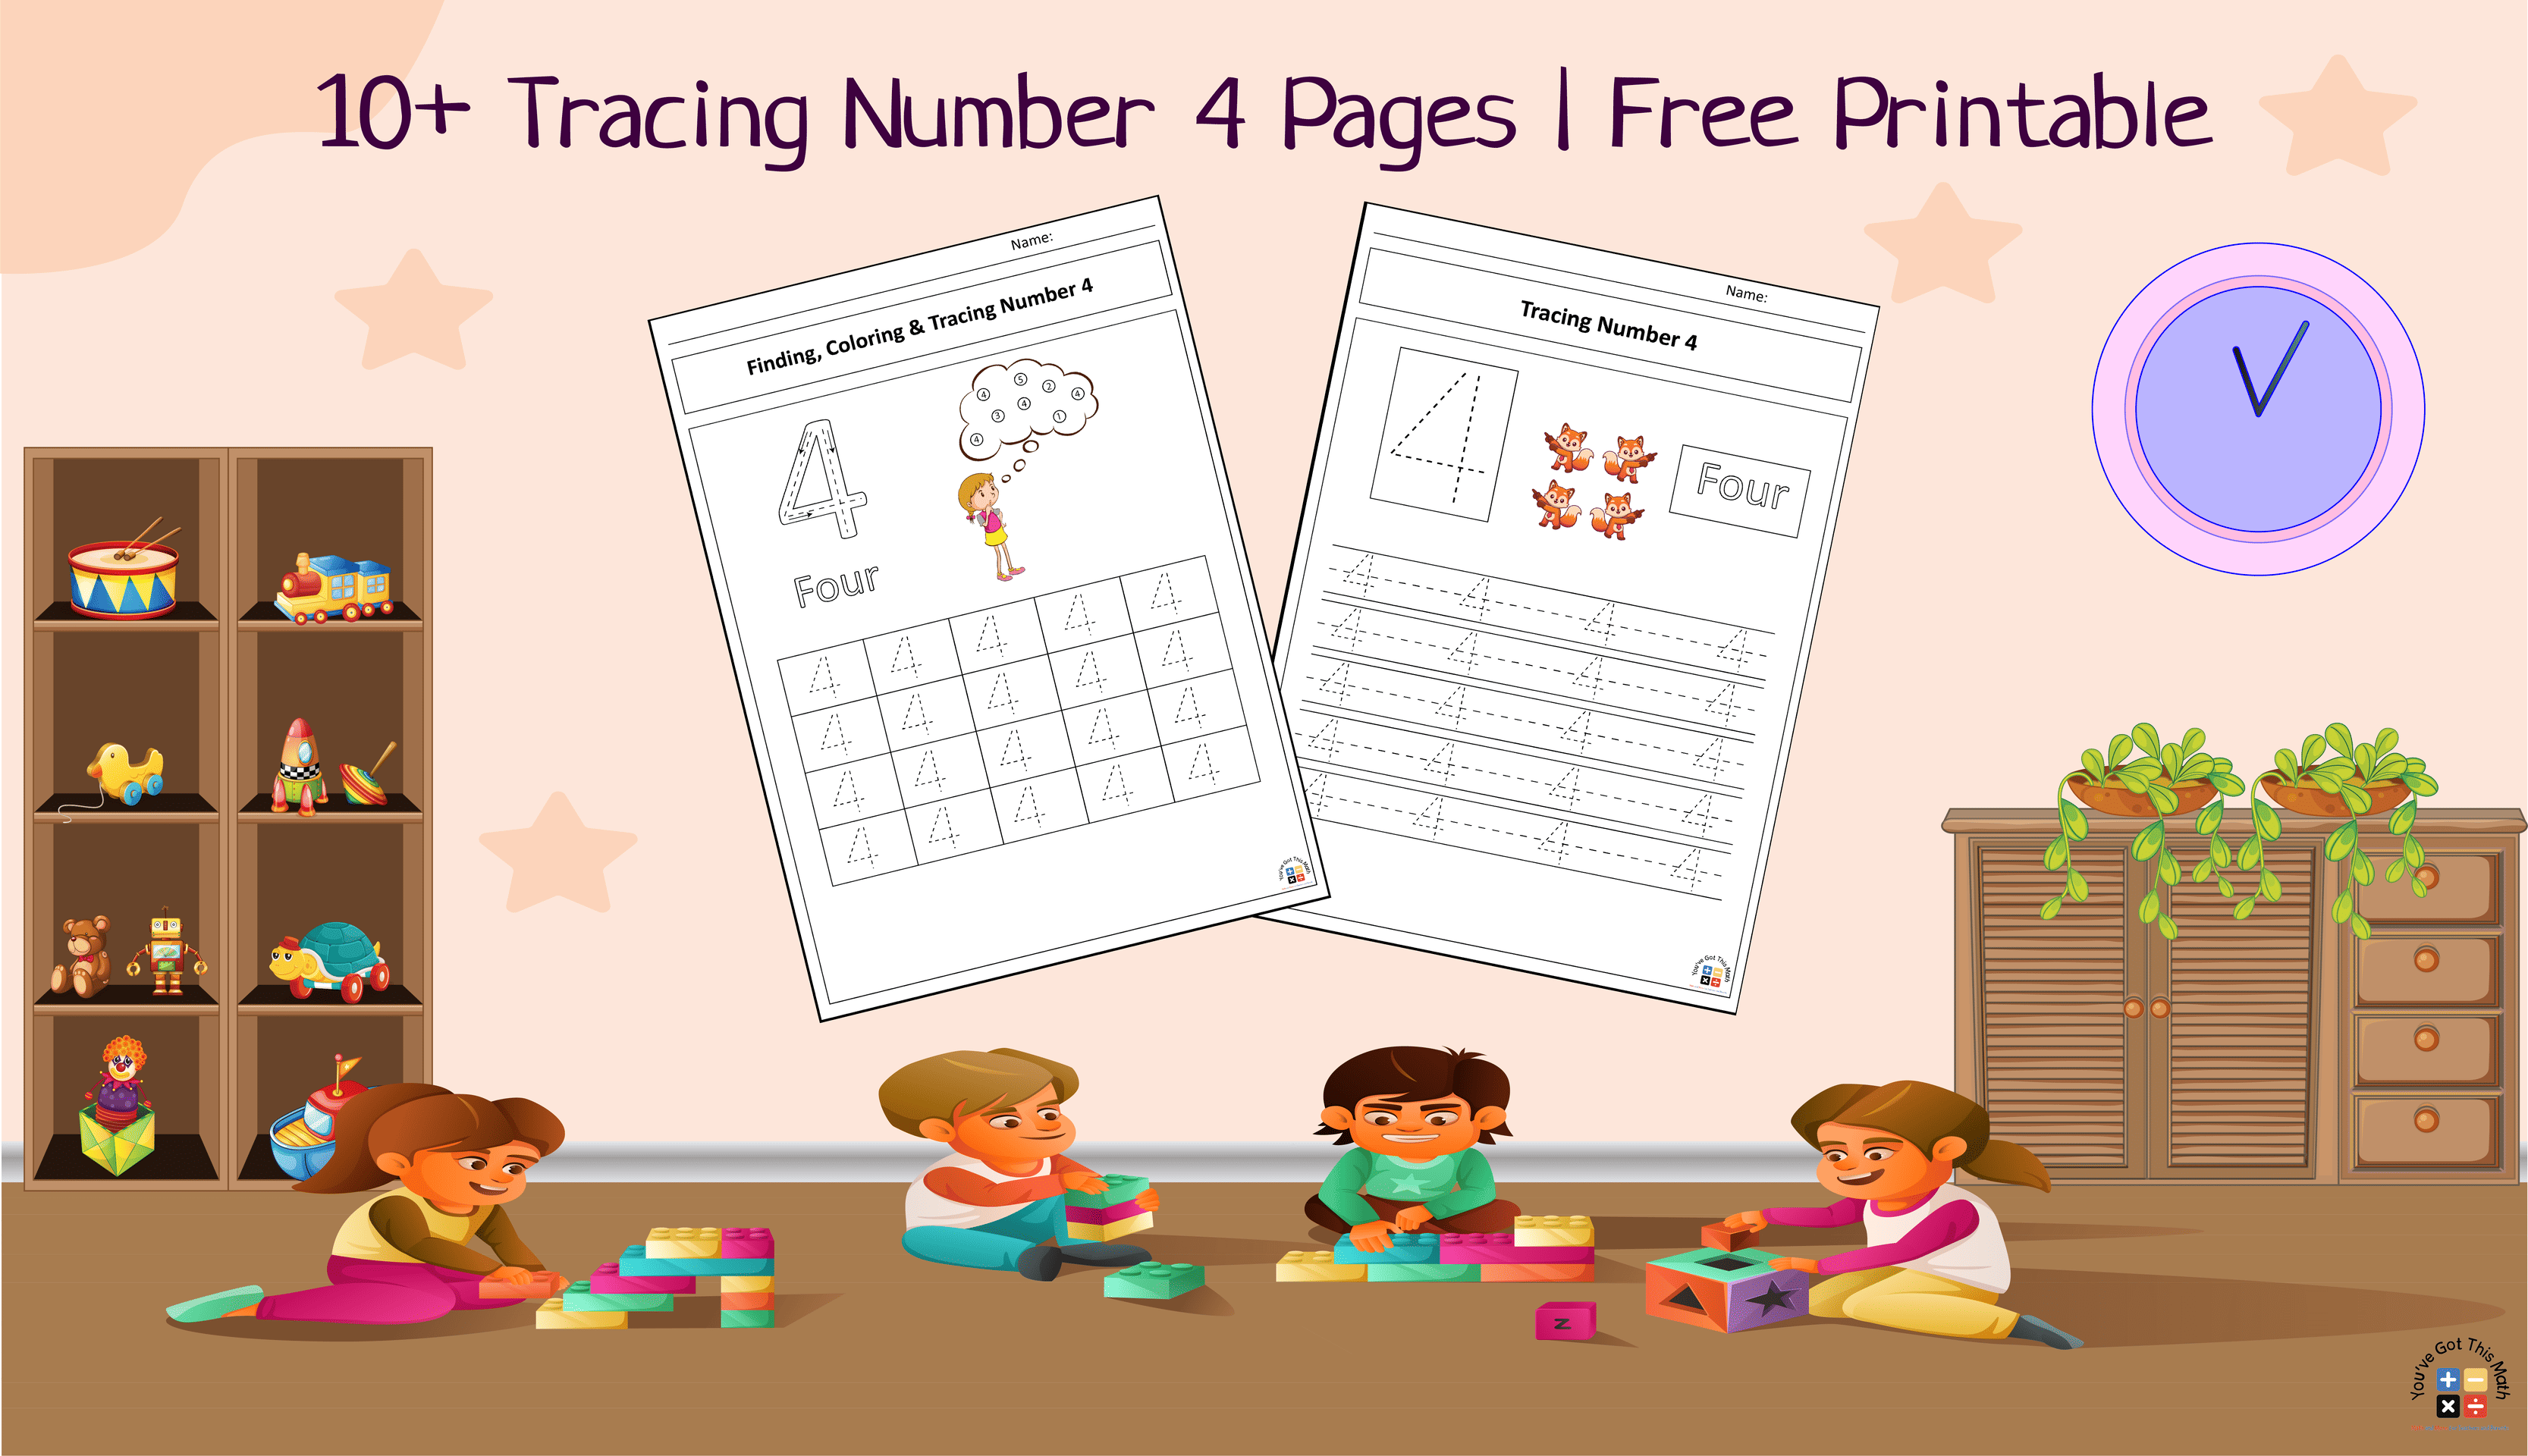 10+ Tracing Number 4 Pages | Free Printable